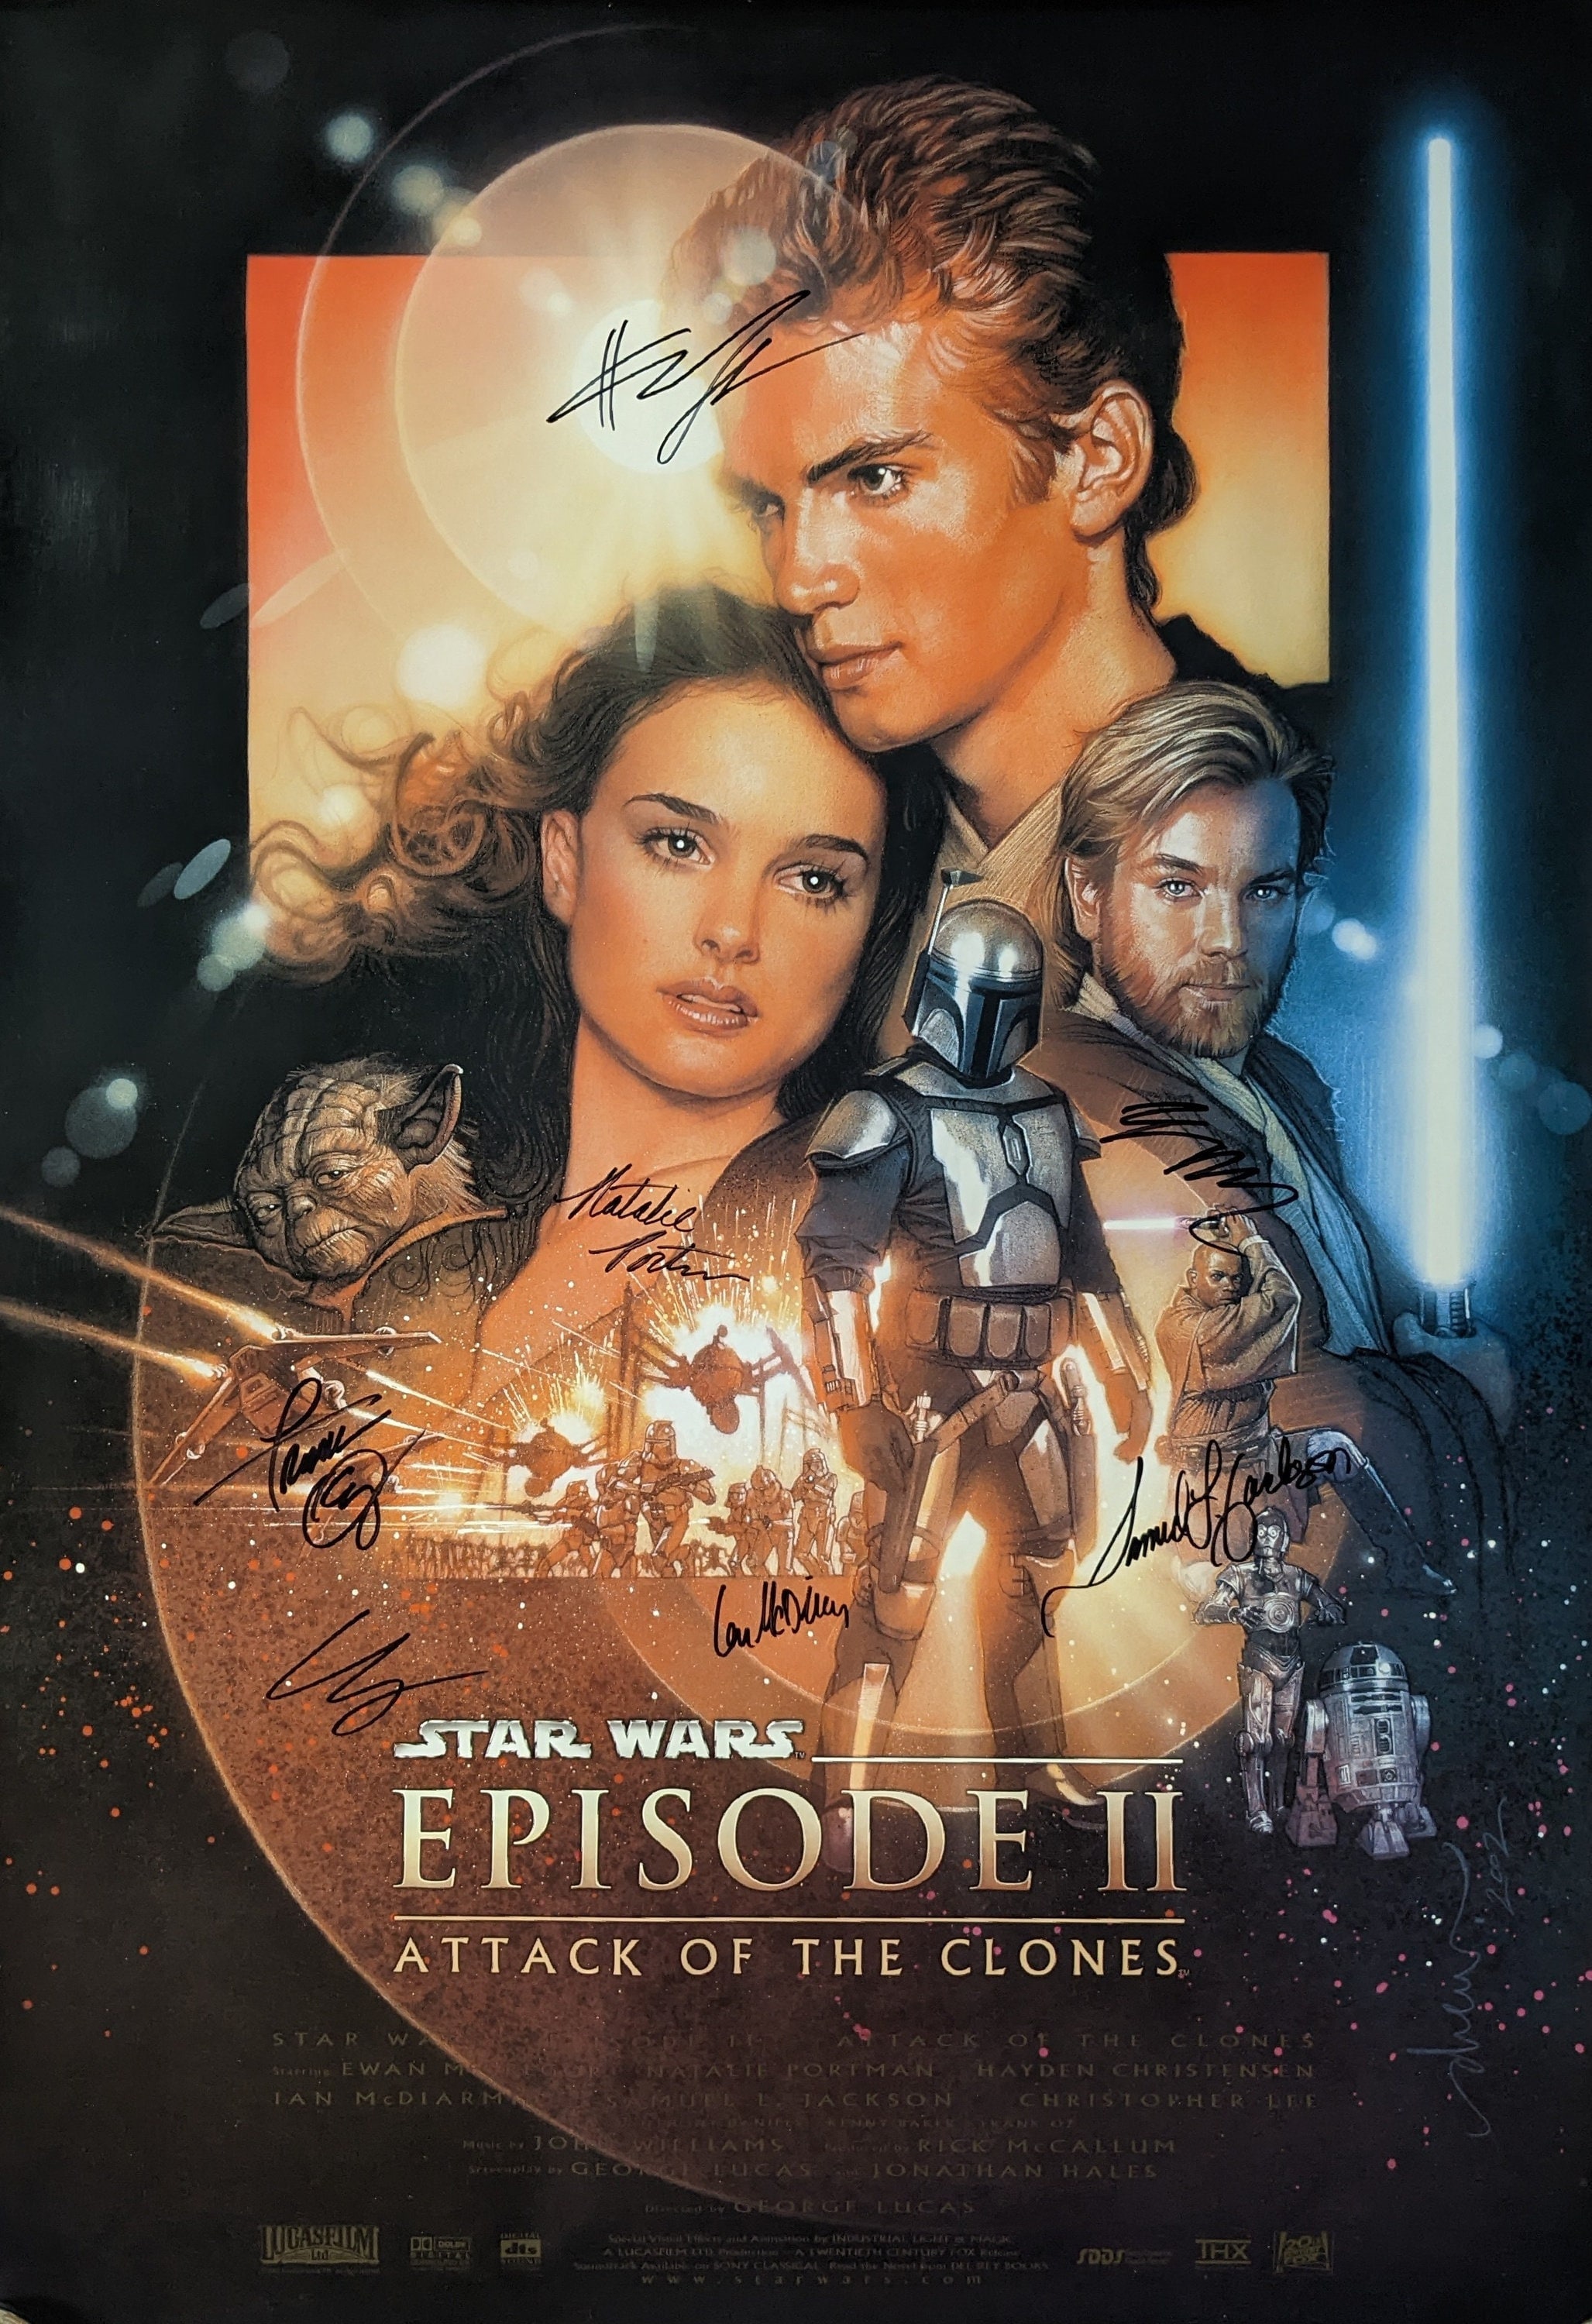 Star Wars Episode 2 Attack of the Clones Cast Signed Movie Poster -   Norway